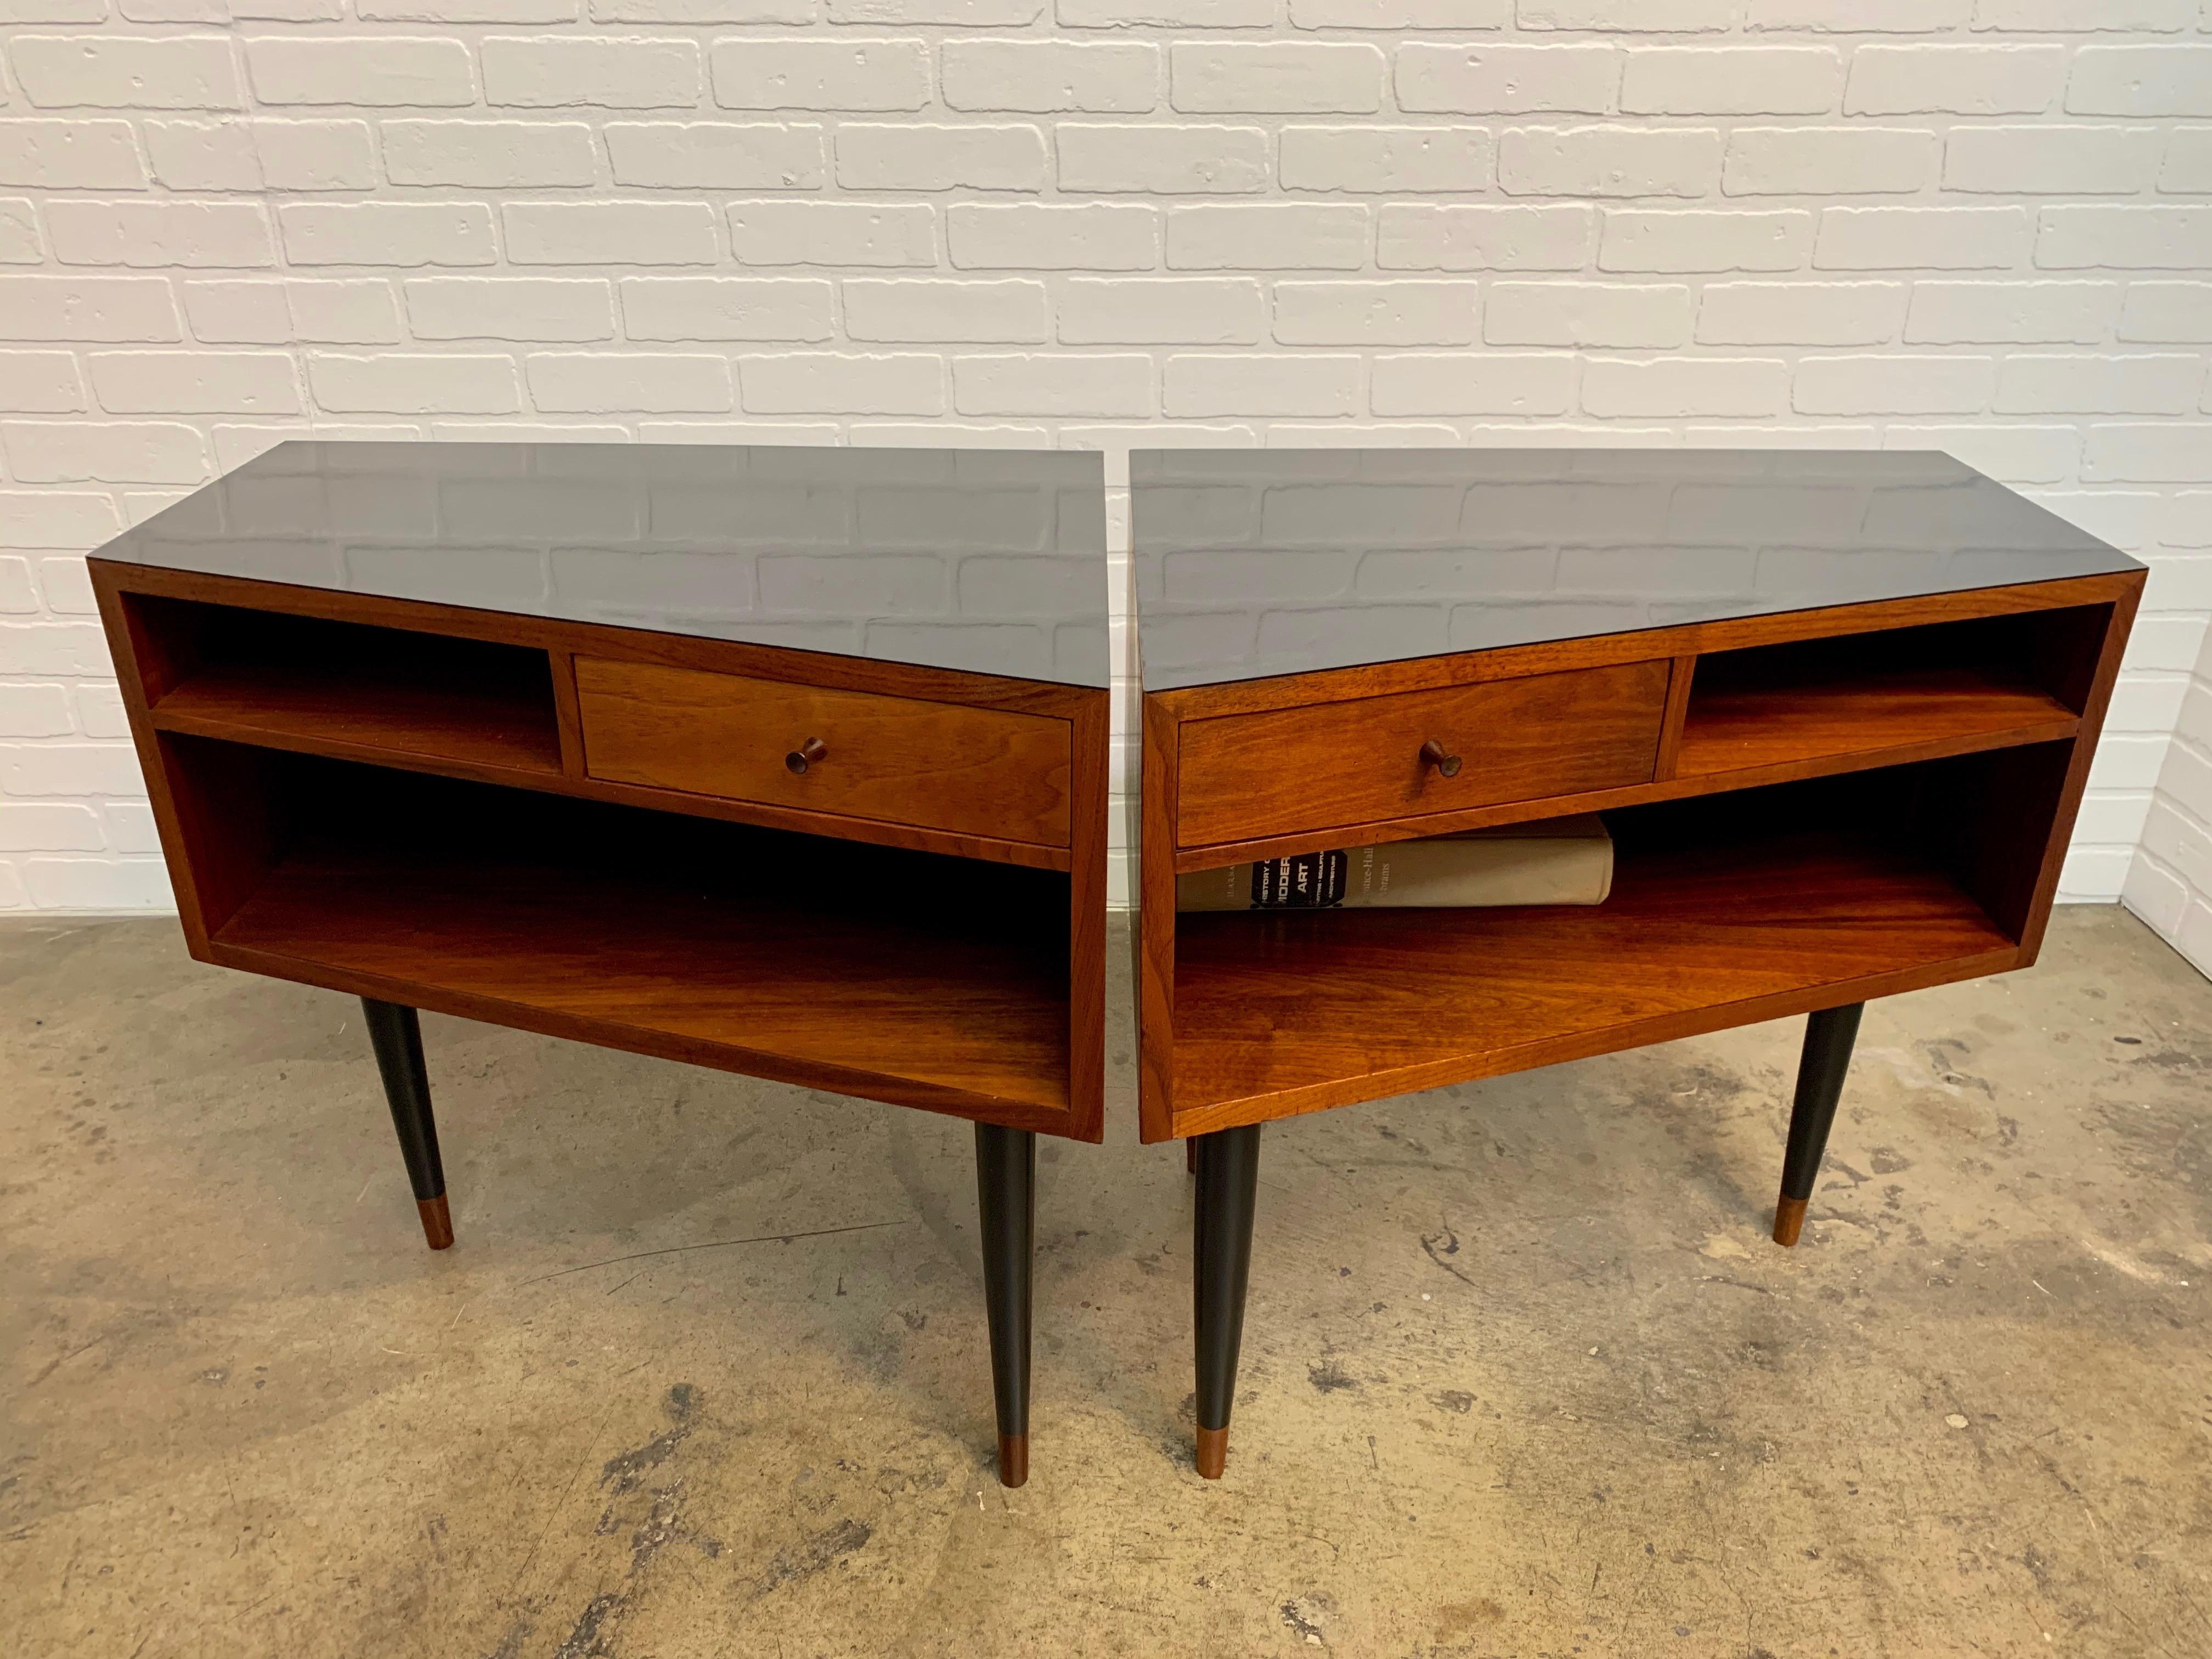 20th Century Midcentury Trapezoidal Shaped Nightstands